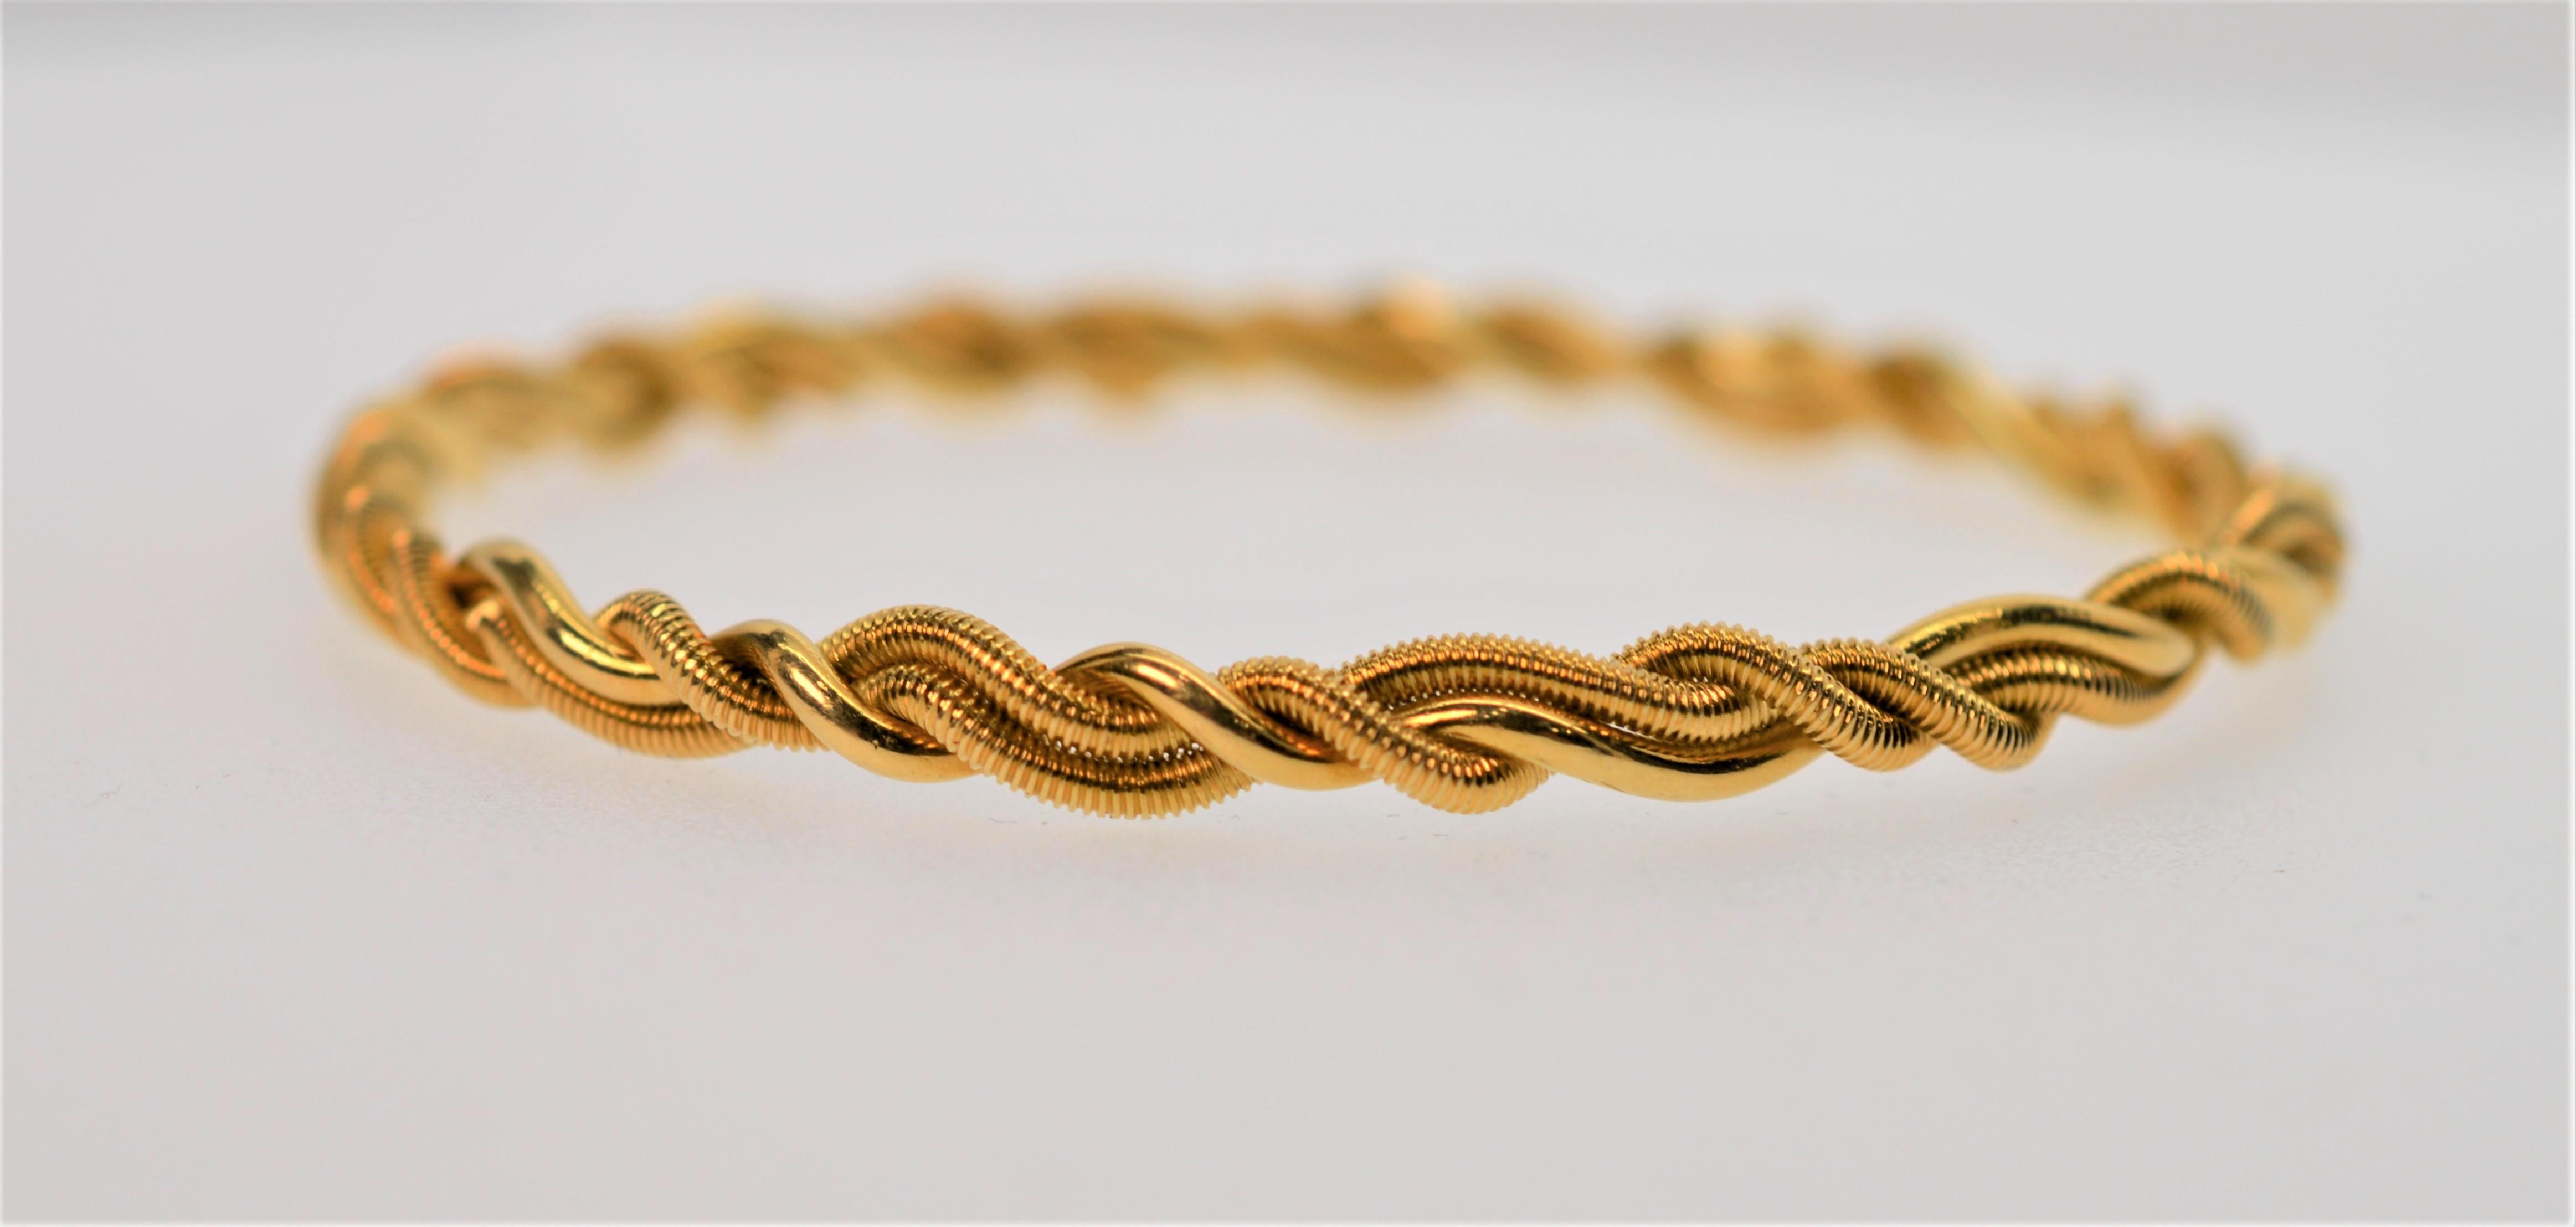 This Tiffany & Co. signed 18K Yellow Gold Bangle Bracelet is expertly crafted with a braided rope design. Versatile and slender design to wear independently or to stack with other pieces in your jewelry wardrobe. Measures 2-3/4 inches in diameter